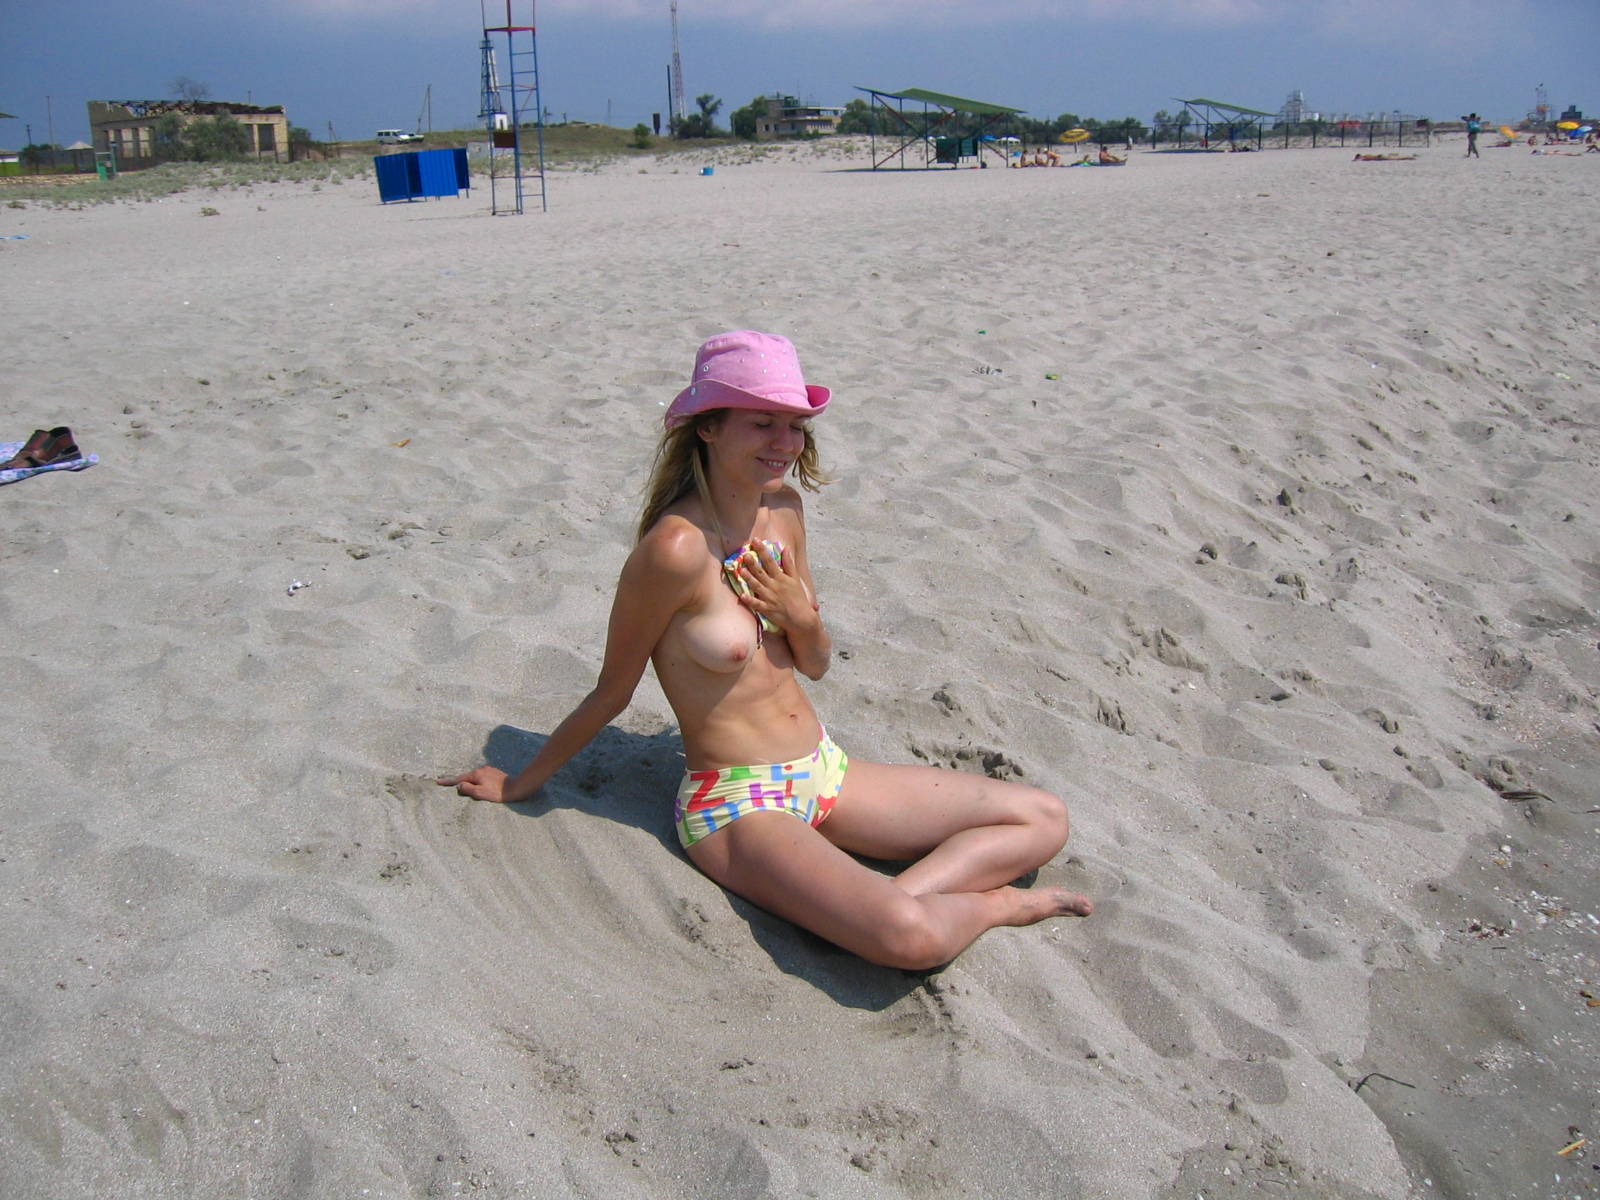 Sweet topless teen and her pink hat